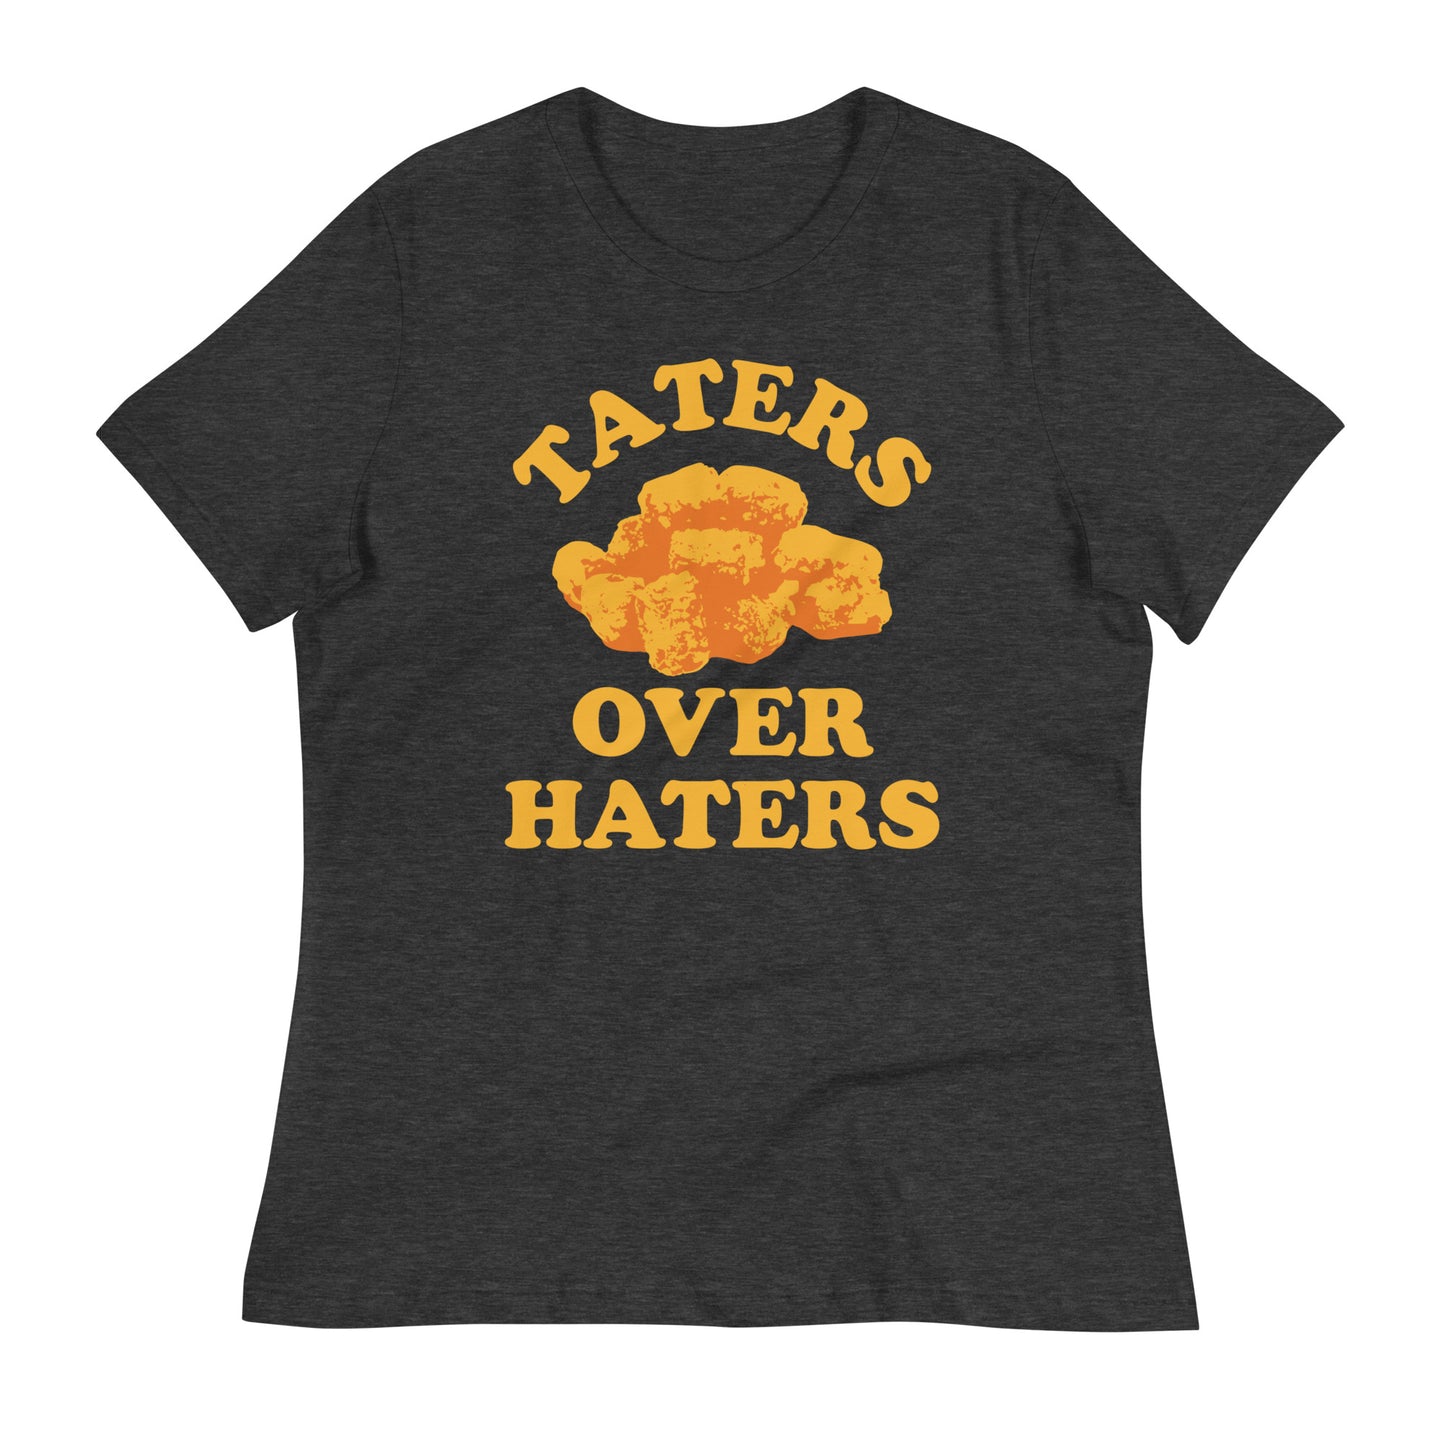 Taters Over Haters Women's Signature Tee